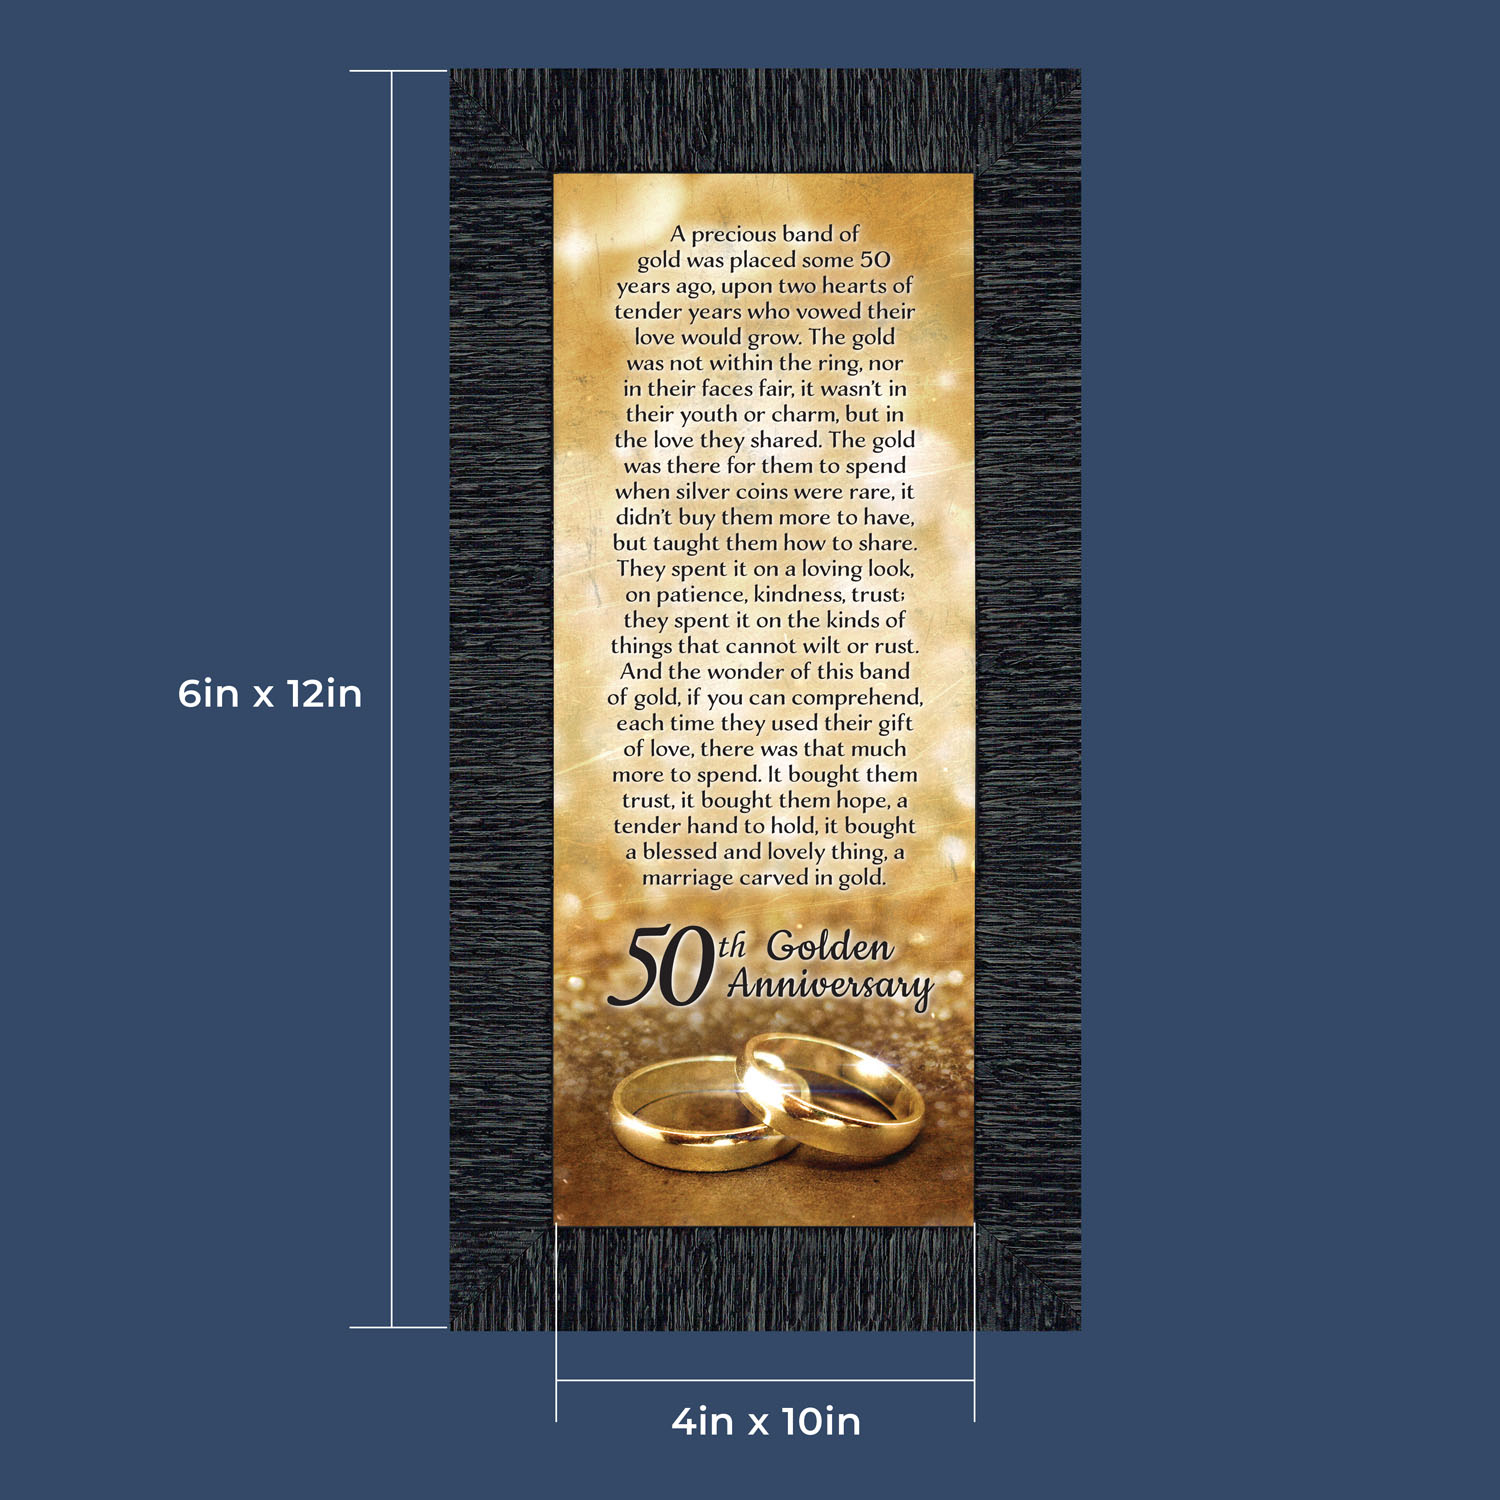 50th Wedding Anniversary Gifts for Parents, 50th Anniversary Decorations for Party, Golden Anniversary 50 Year Gifts, 50th Anniversary Gifts for Couples, Gift with 50th Anniversary Card 7318CH - image 2 of 8